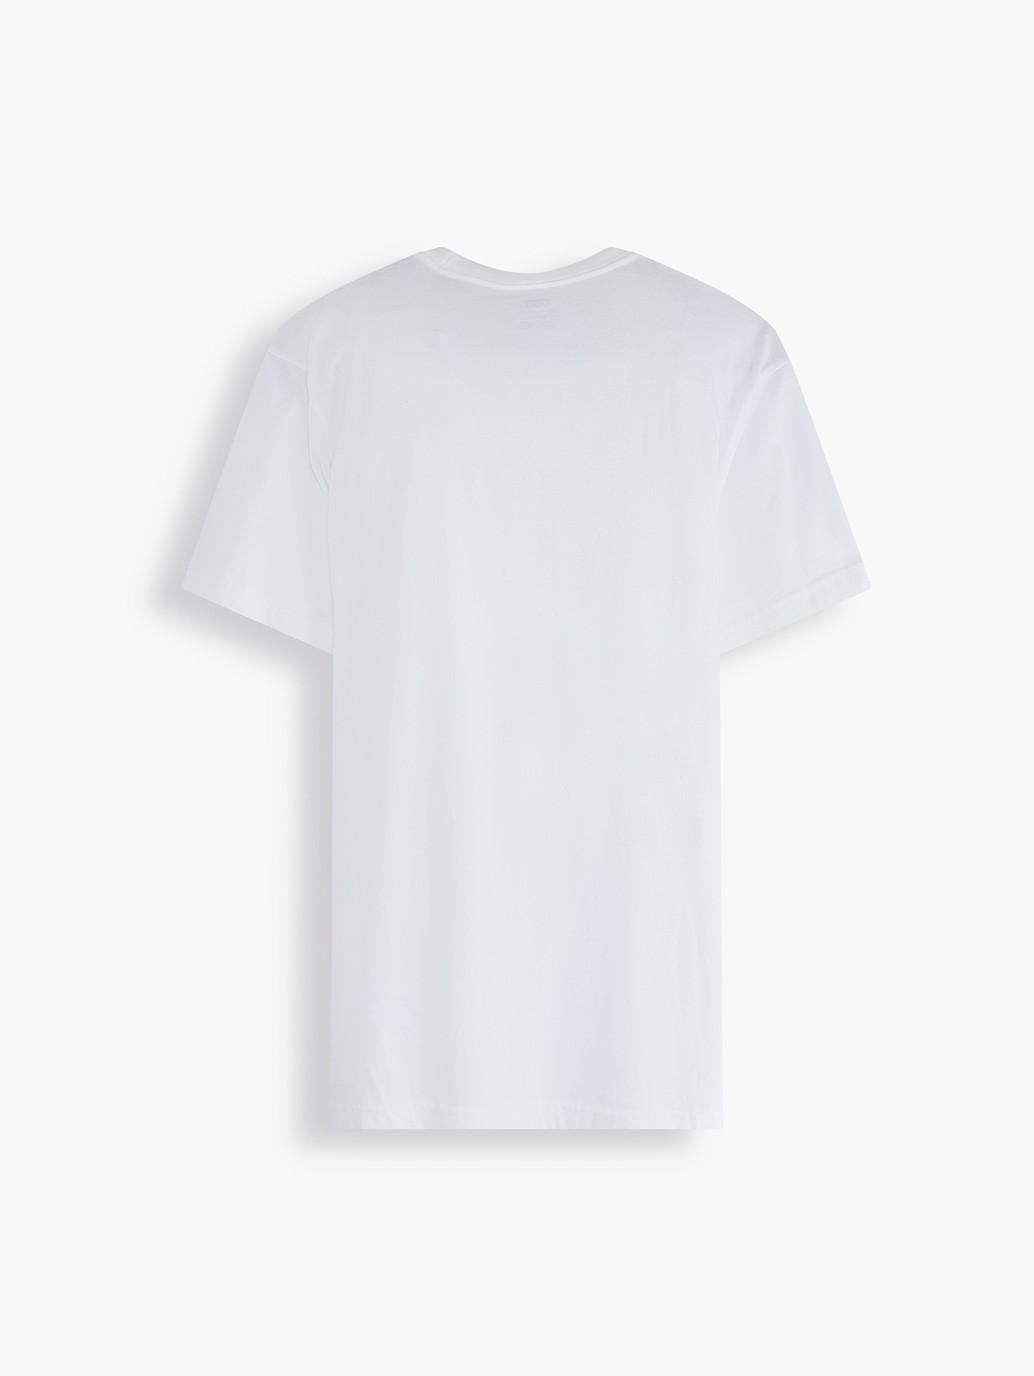 Buy Levi's® Men's Relaxed Fit Short Sleeve Graphic T-Shirt | Levi’s ...